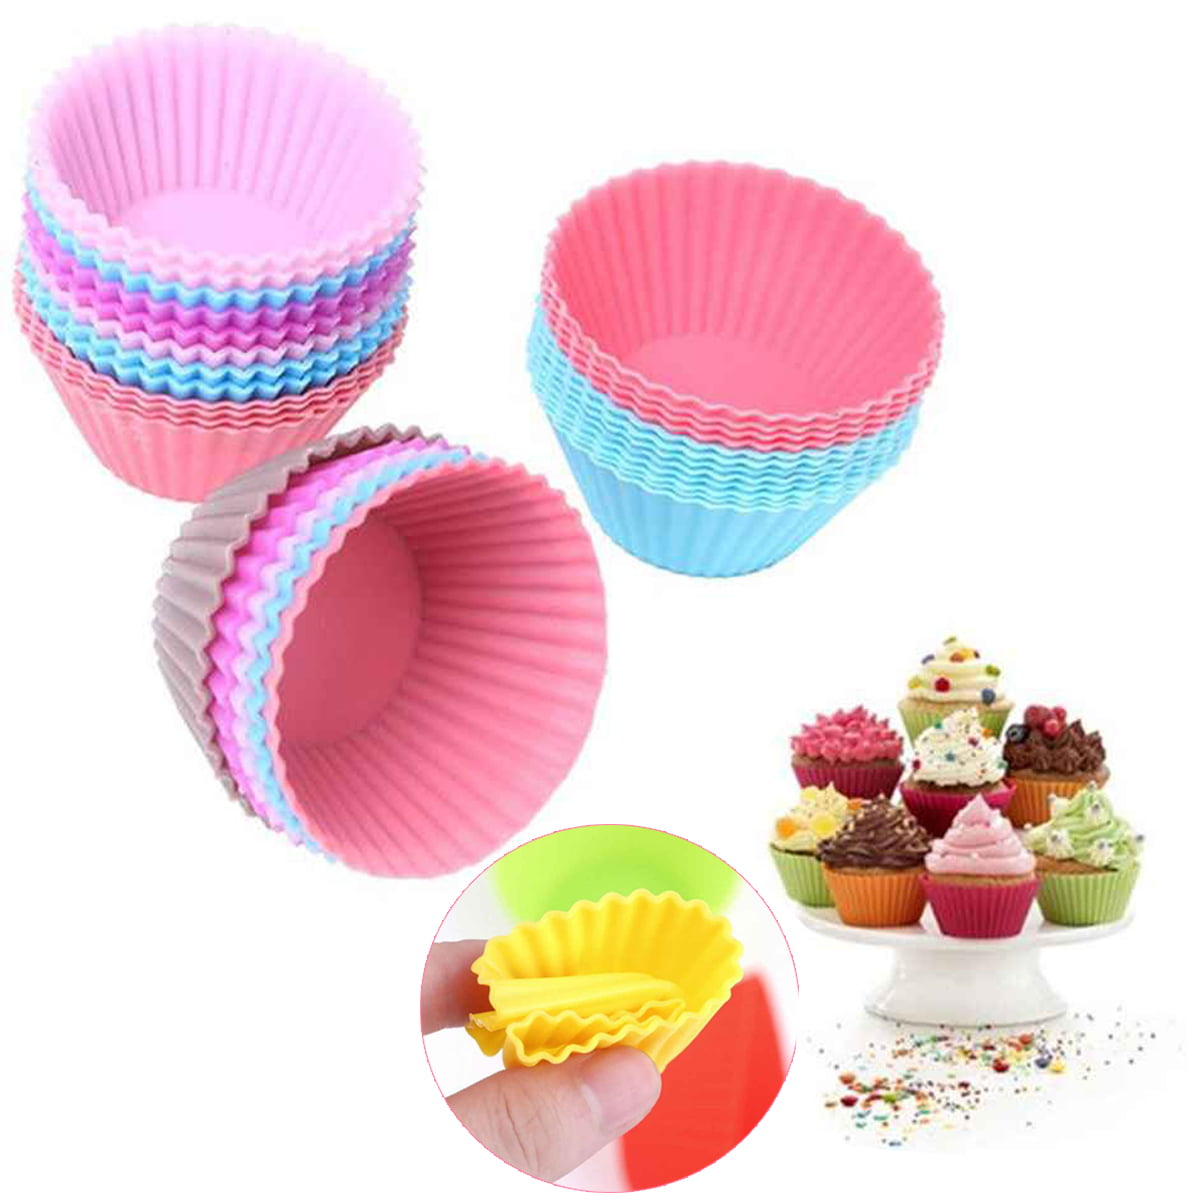 12 Star Shape Silicone Cupcakes Case Cake Baking Cases Moulds Cooking Mold